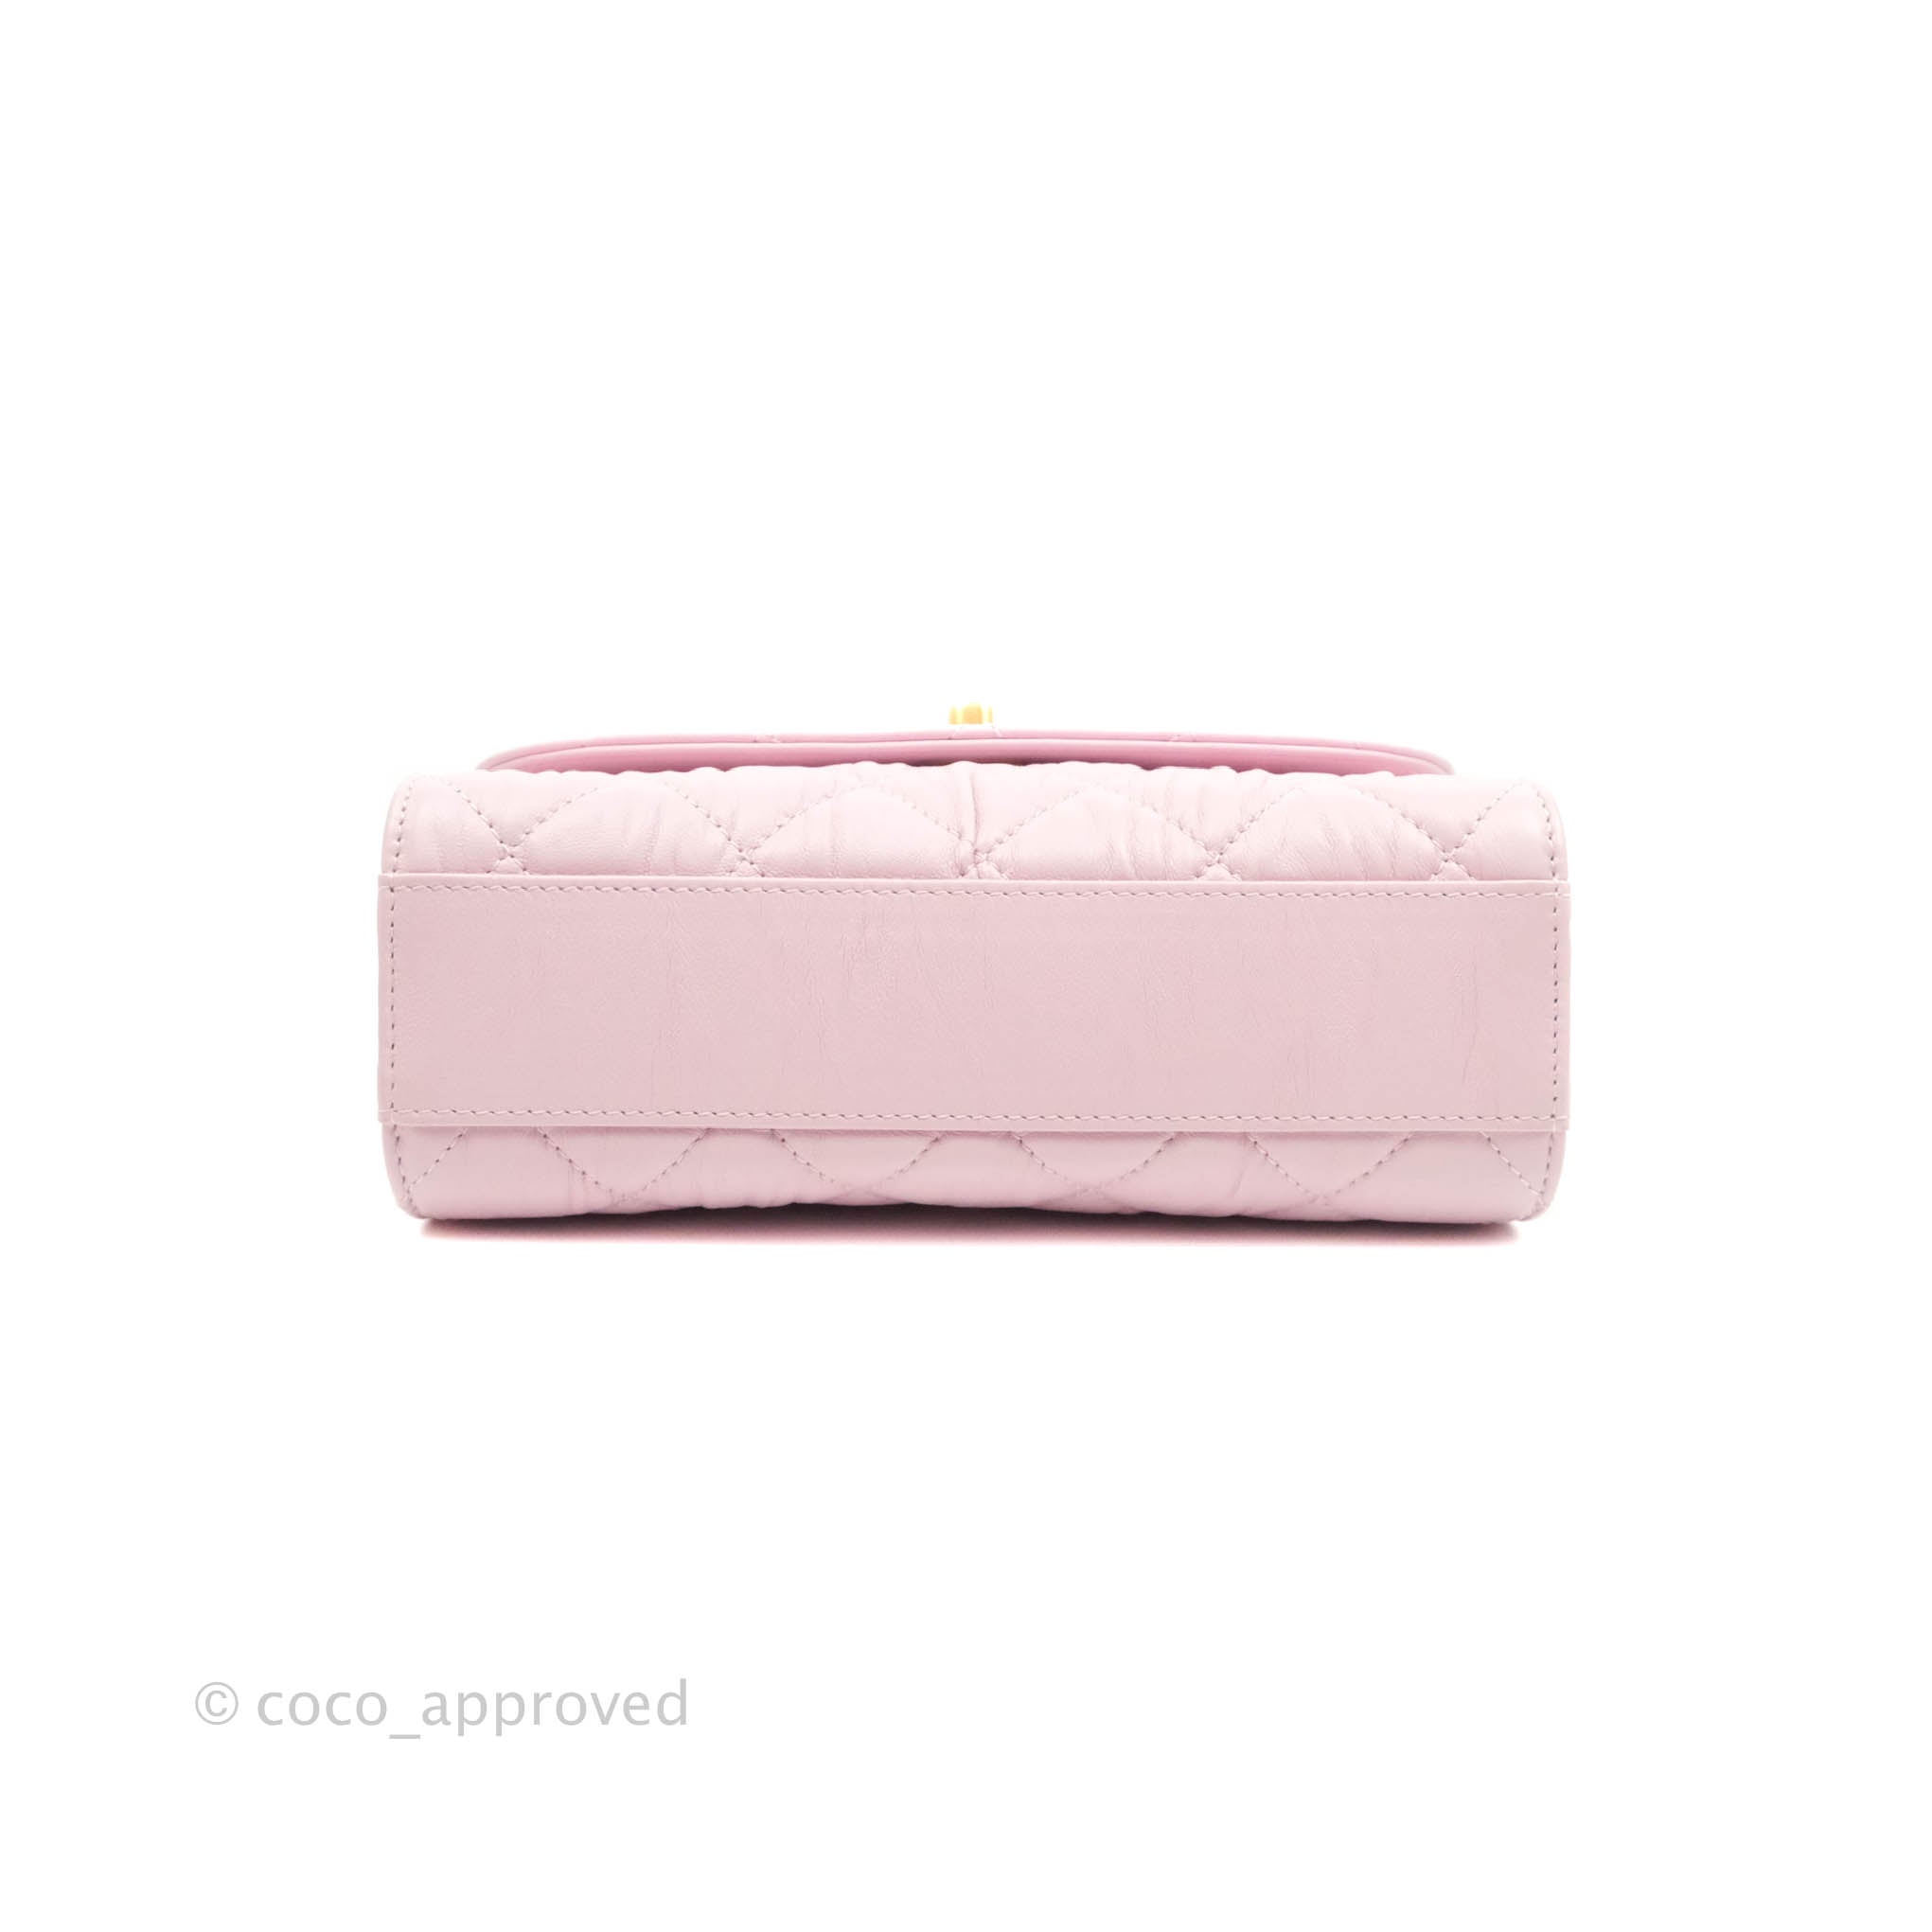 Chanel Mini Flap Bag with Top Handle Pink Crumpled Lambskin Aged